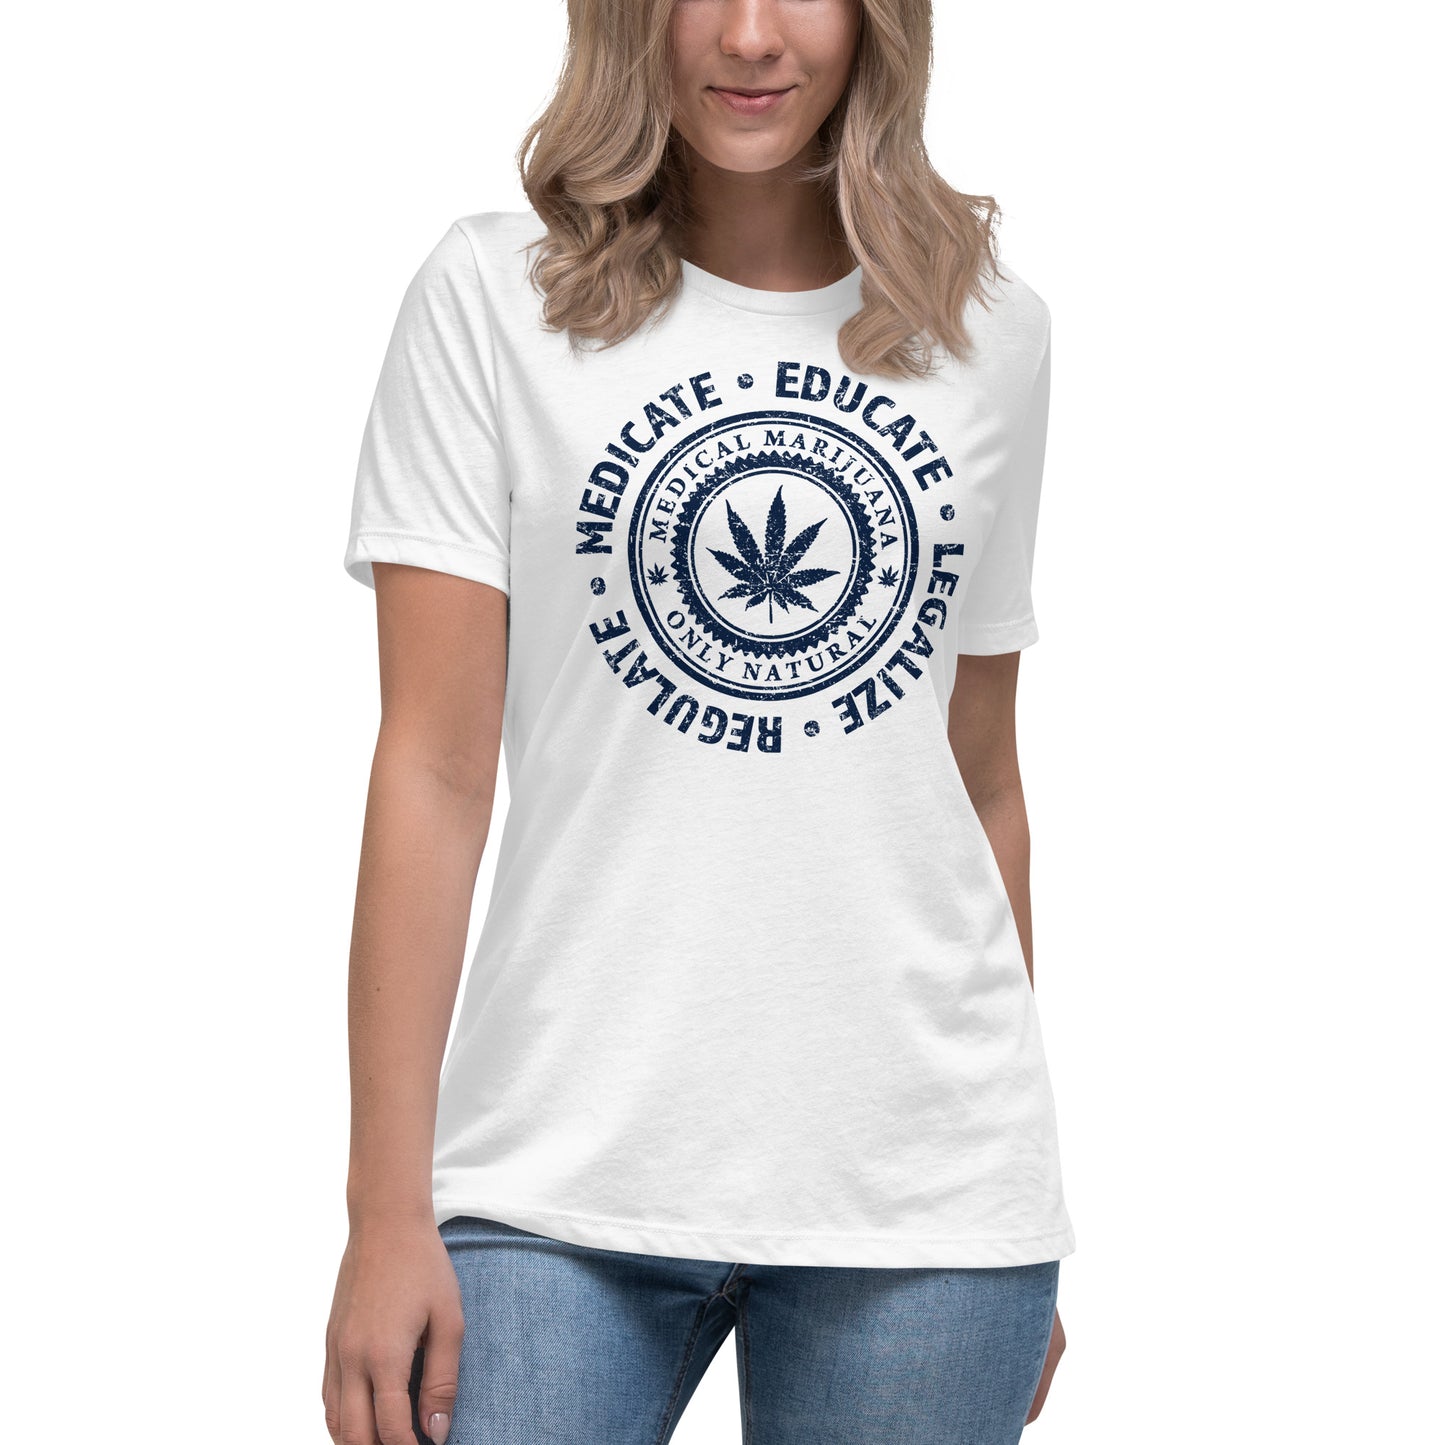 Educate Legalize Women's Relaxed T-Shirt